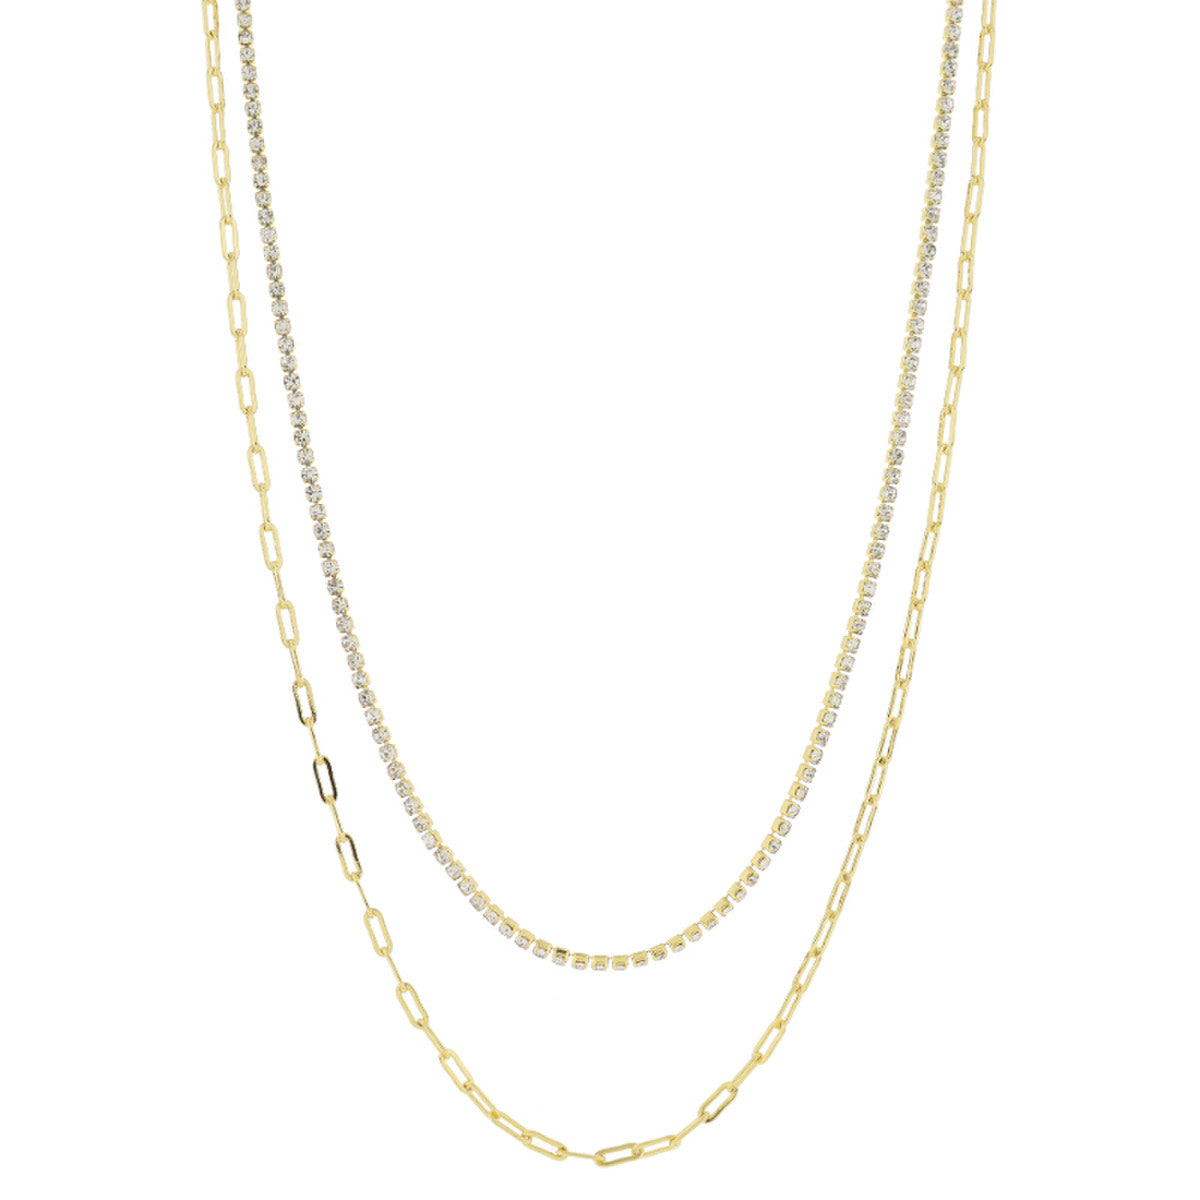 You're Golden Collection 18K Necklace (More Options/Styles)